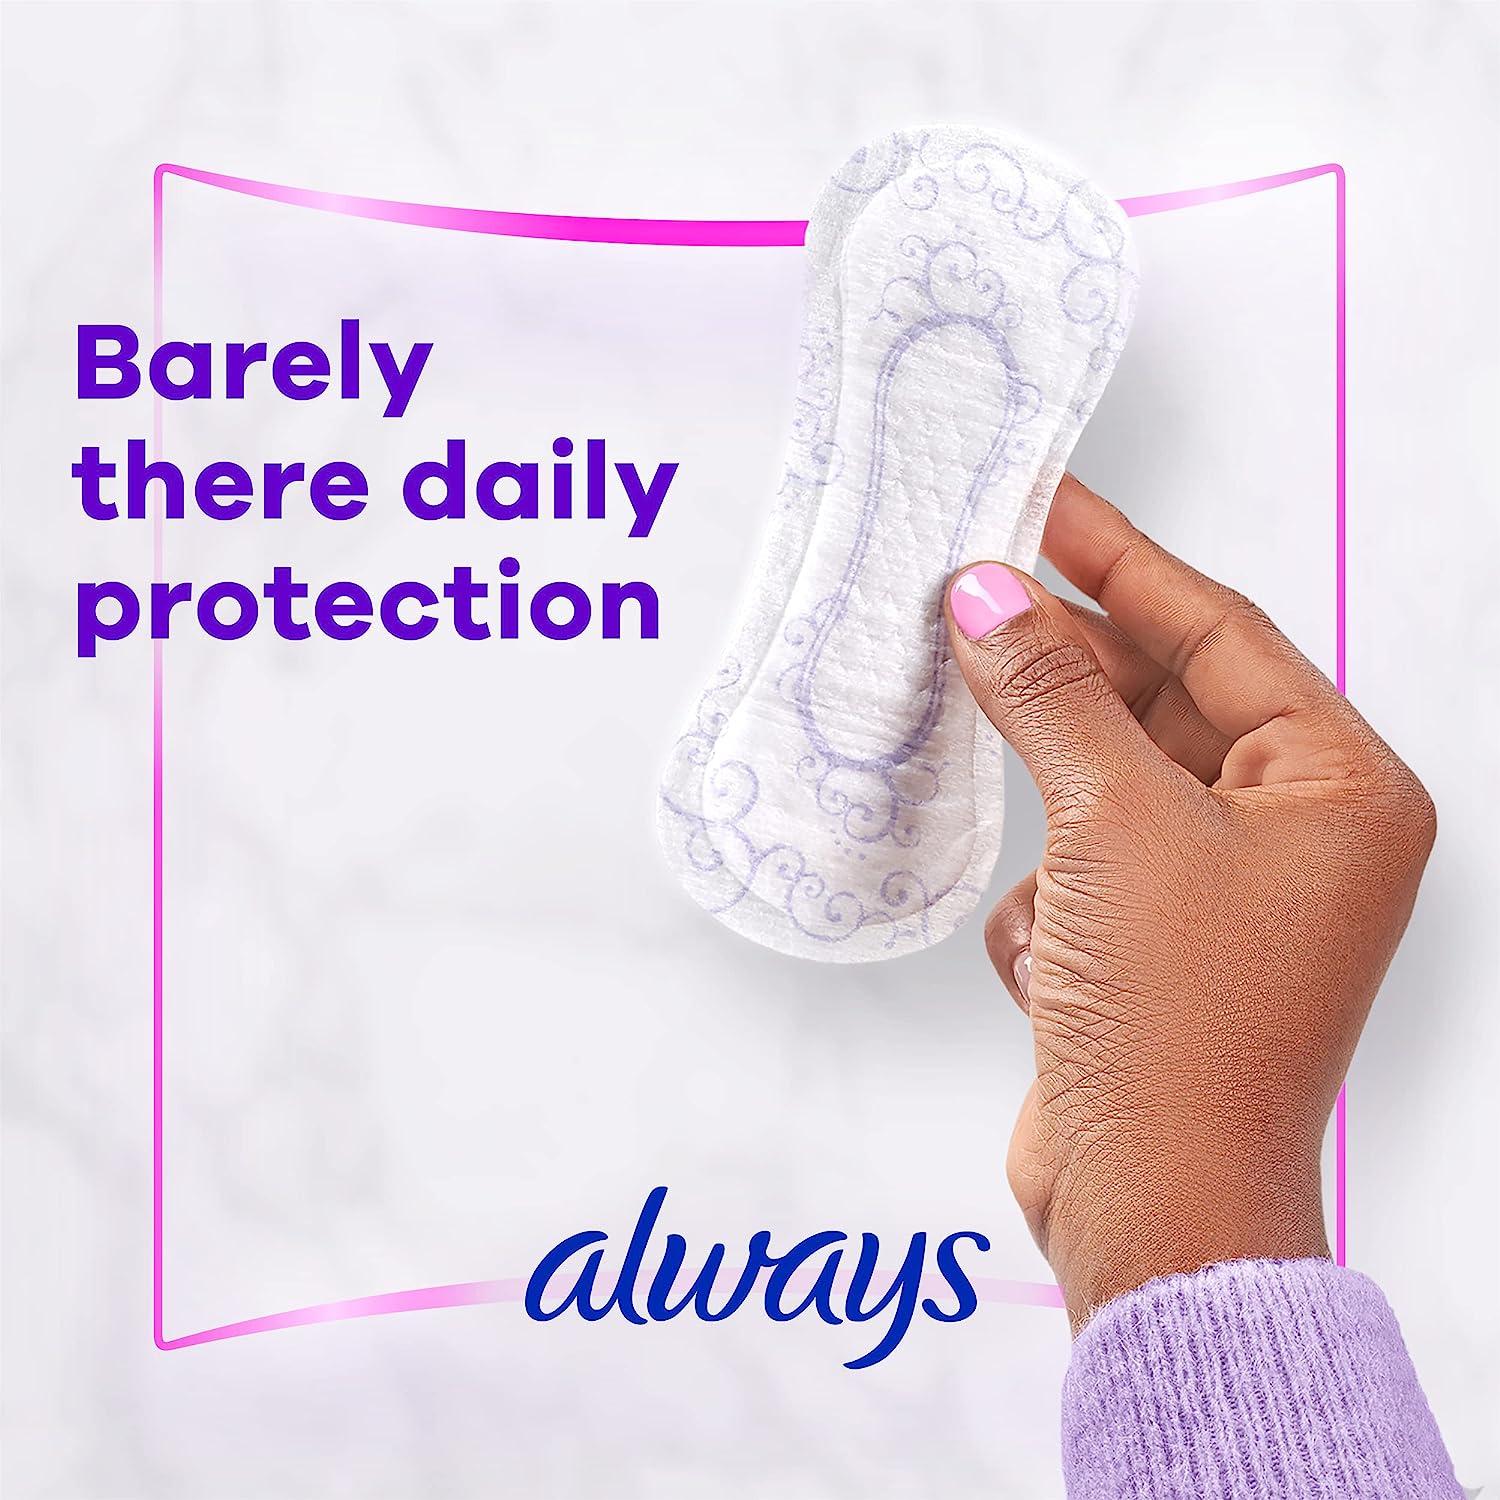 Always Radiant Daily Pantiliners Panty Liners For Women Long